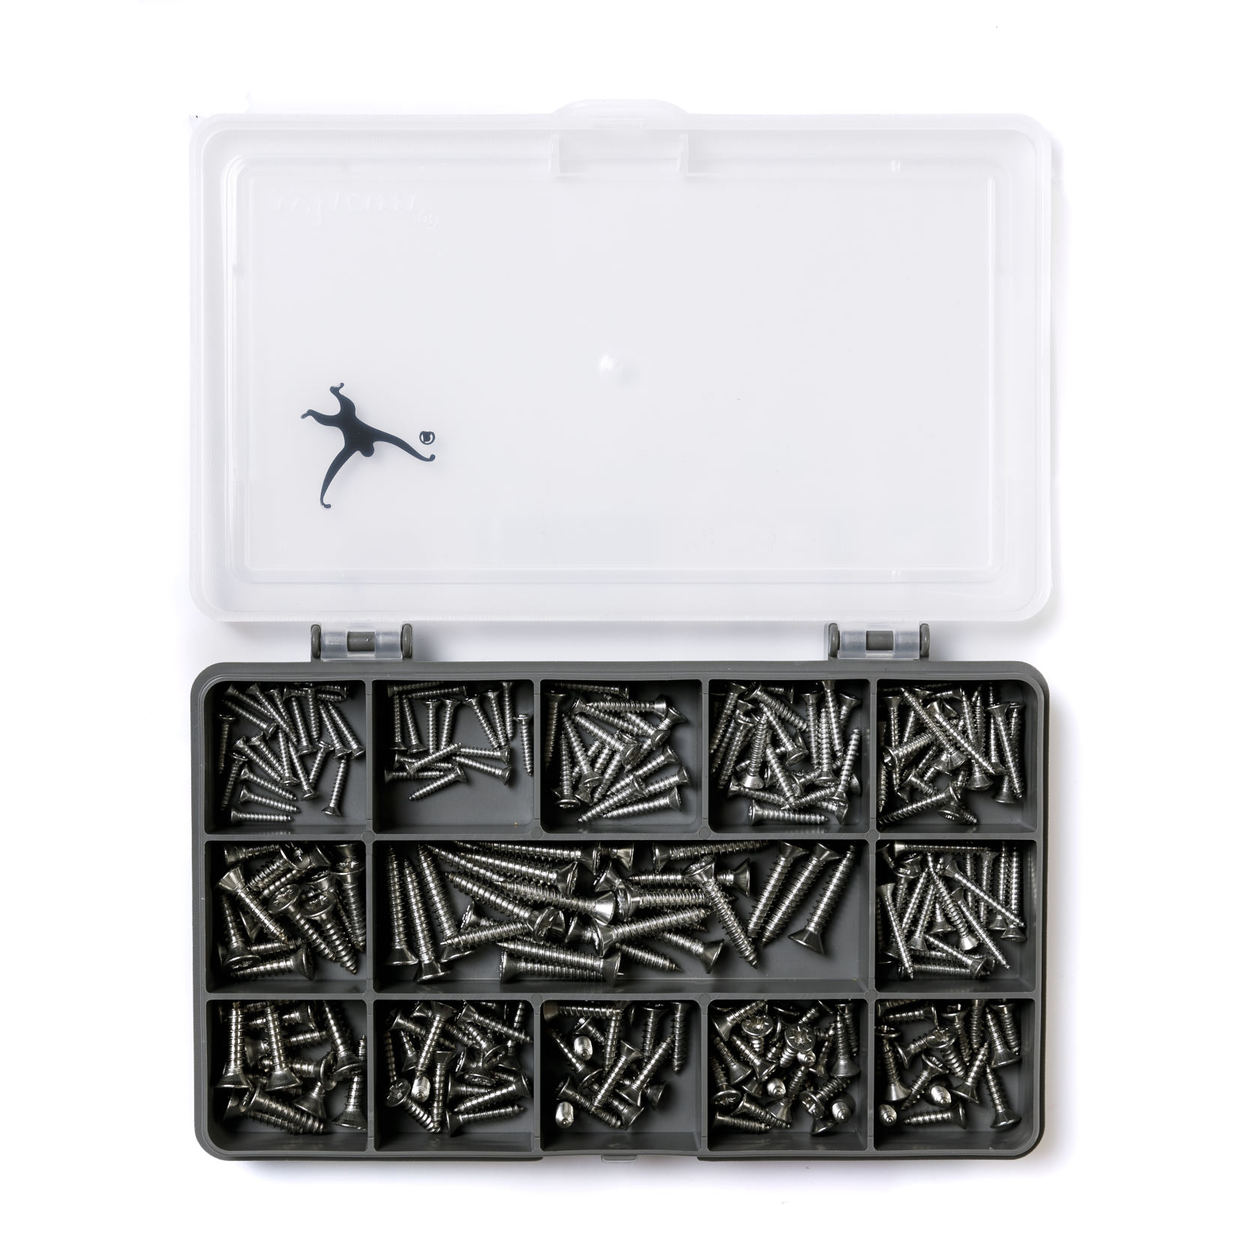 2 4 6 8 POZI COUNTERSUNK SELF TAPPING SCREWS KIT 245 ASSORTED A2 STAINLESS No 